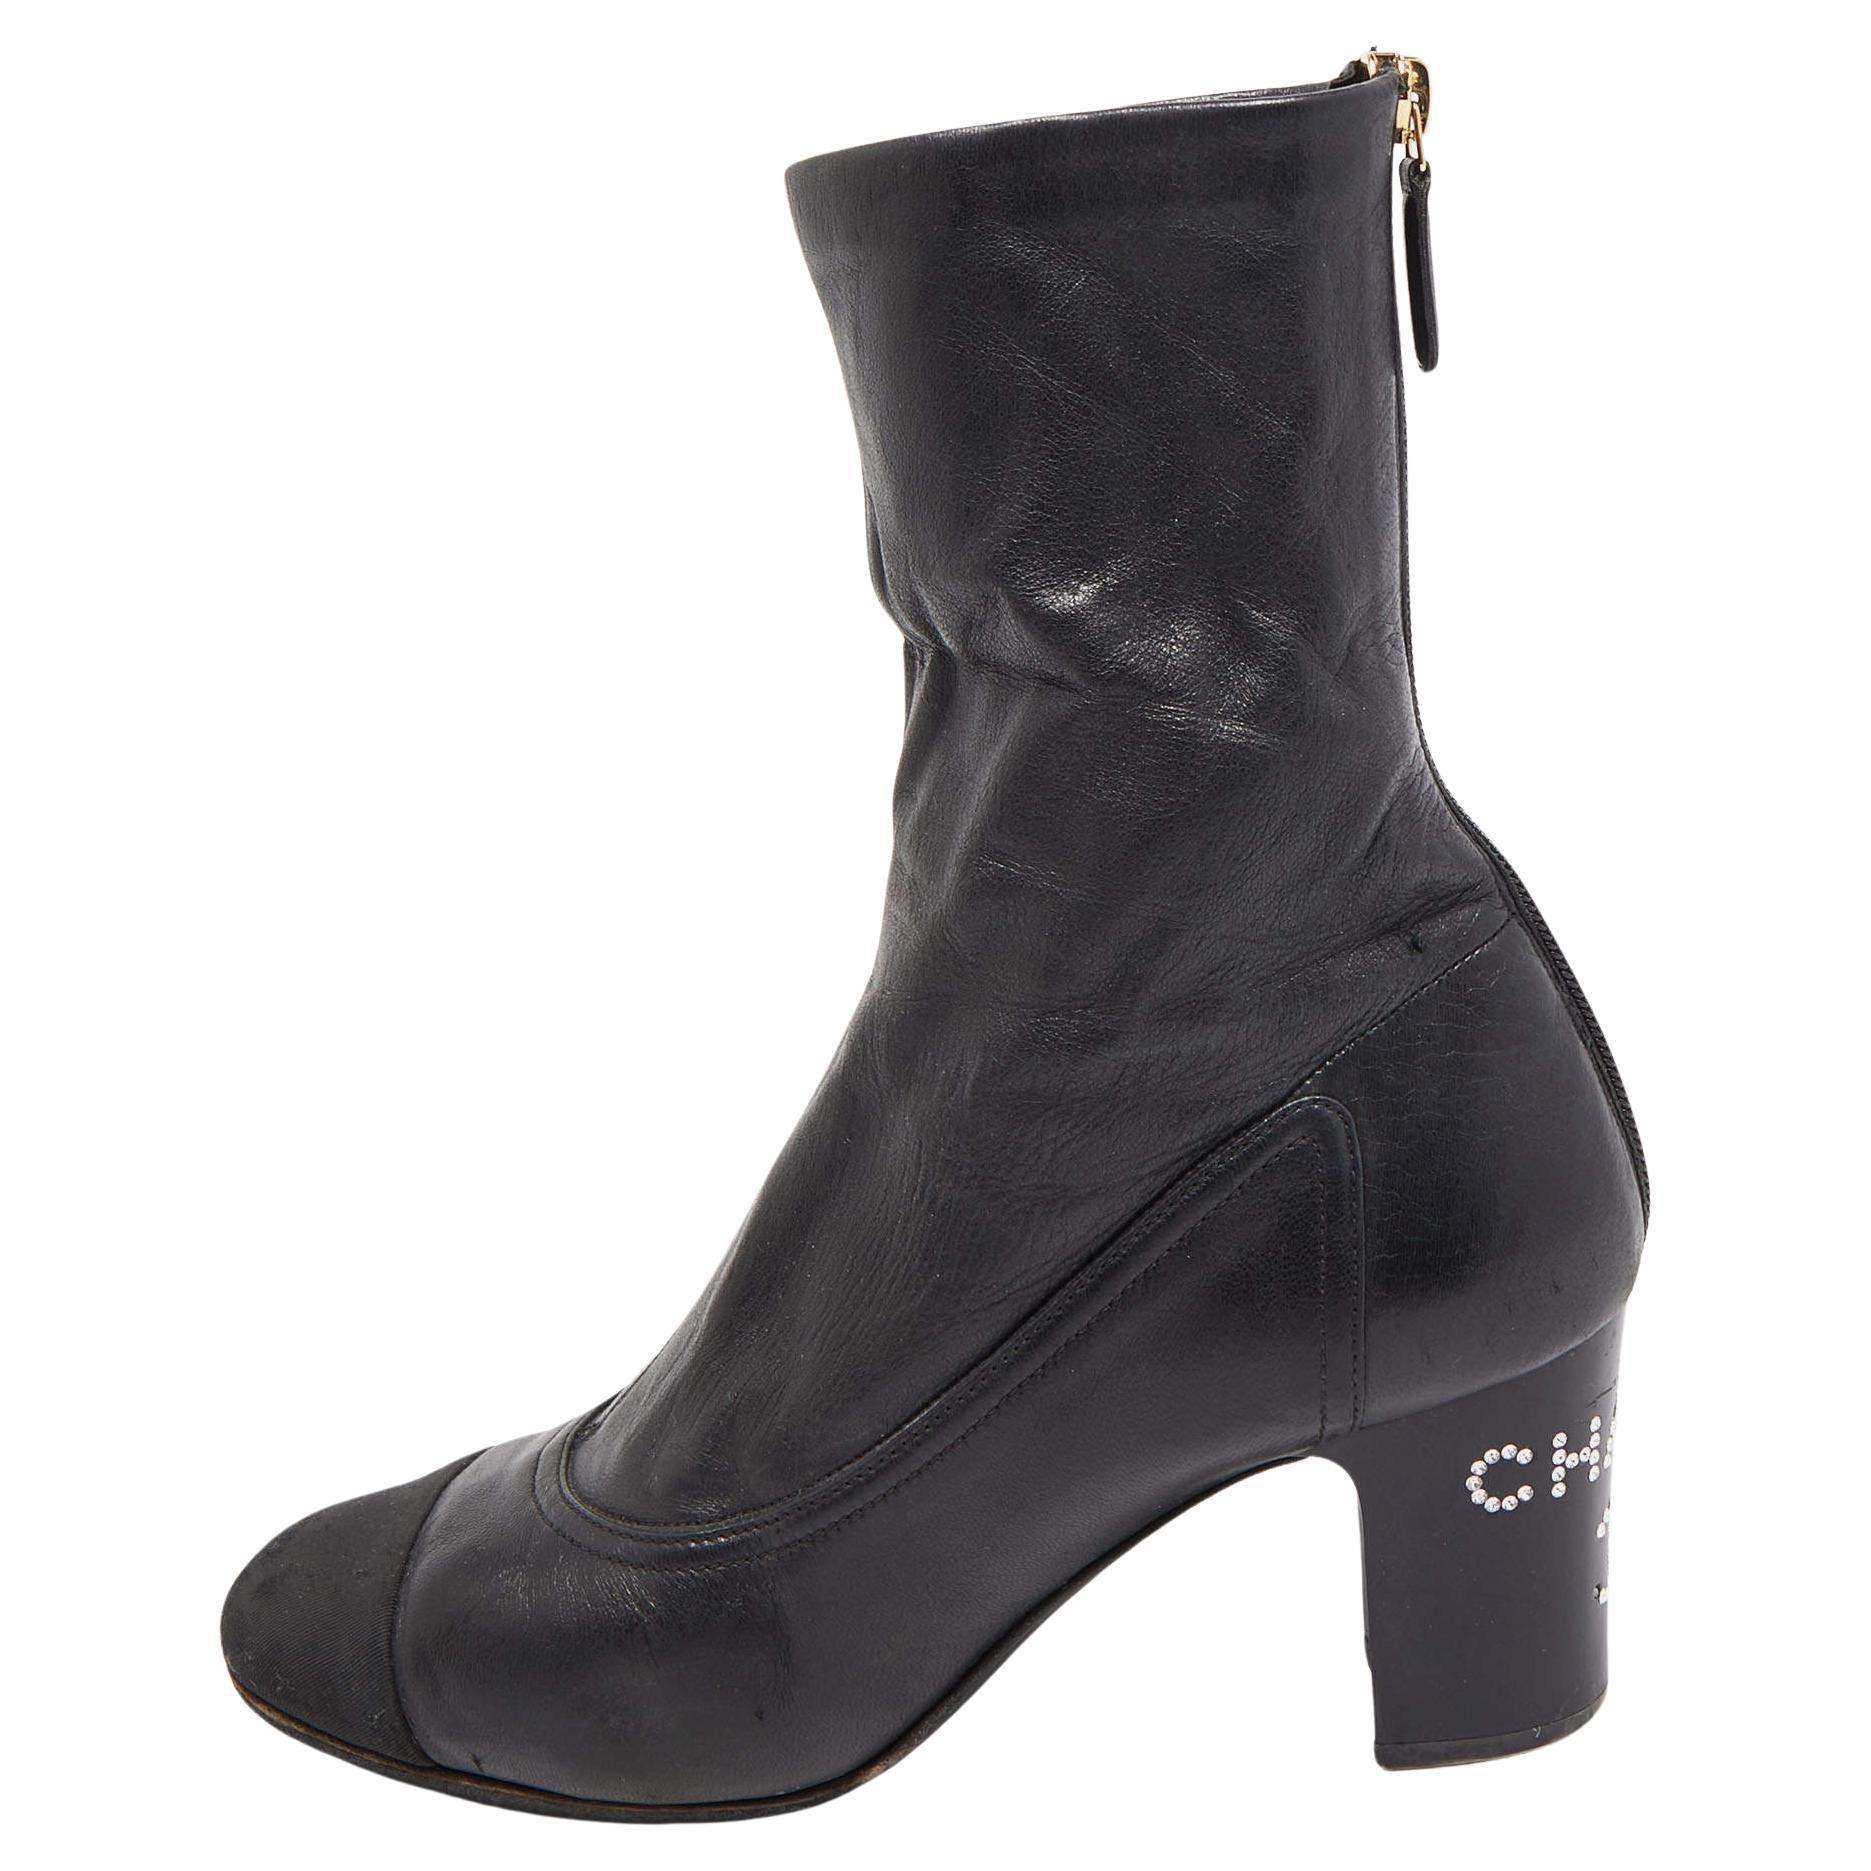 Best Deals for Chanel Riding Boots